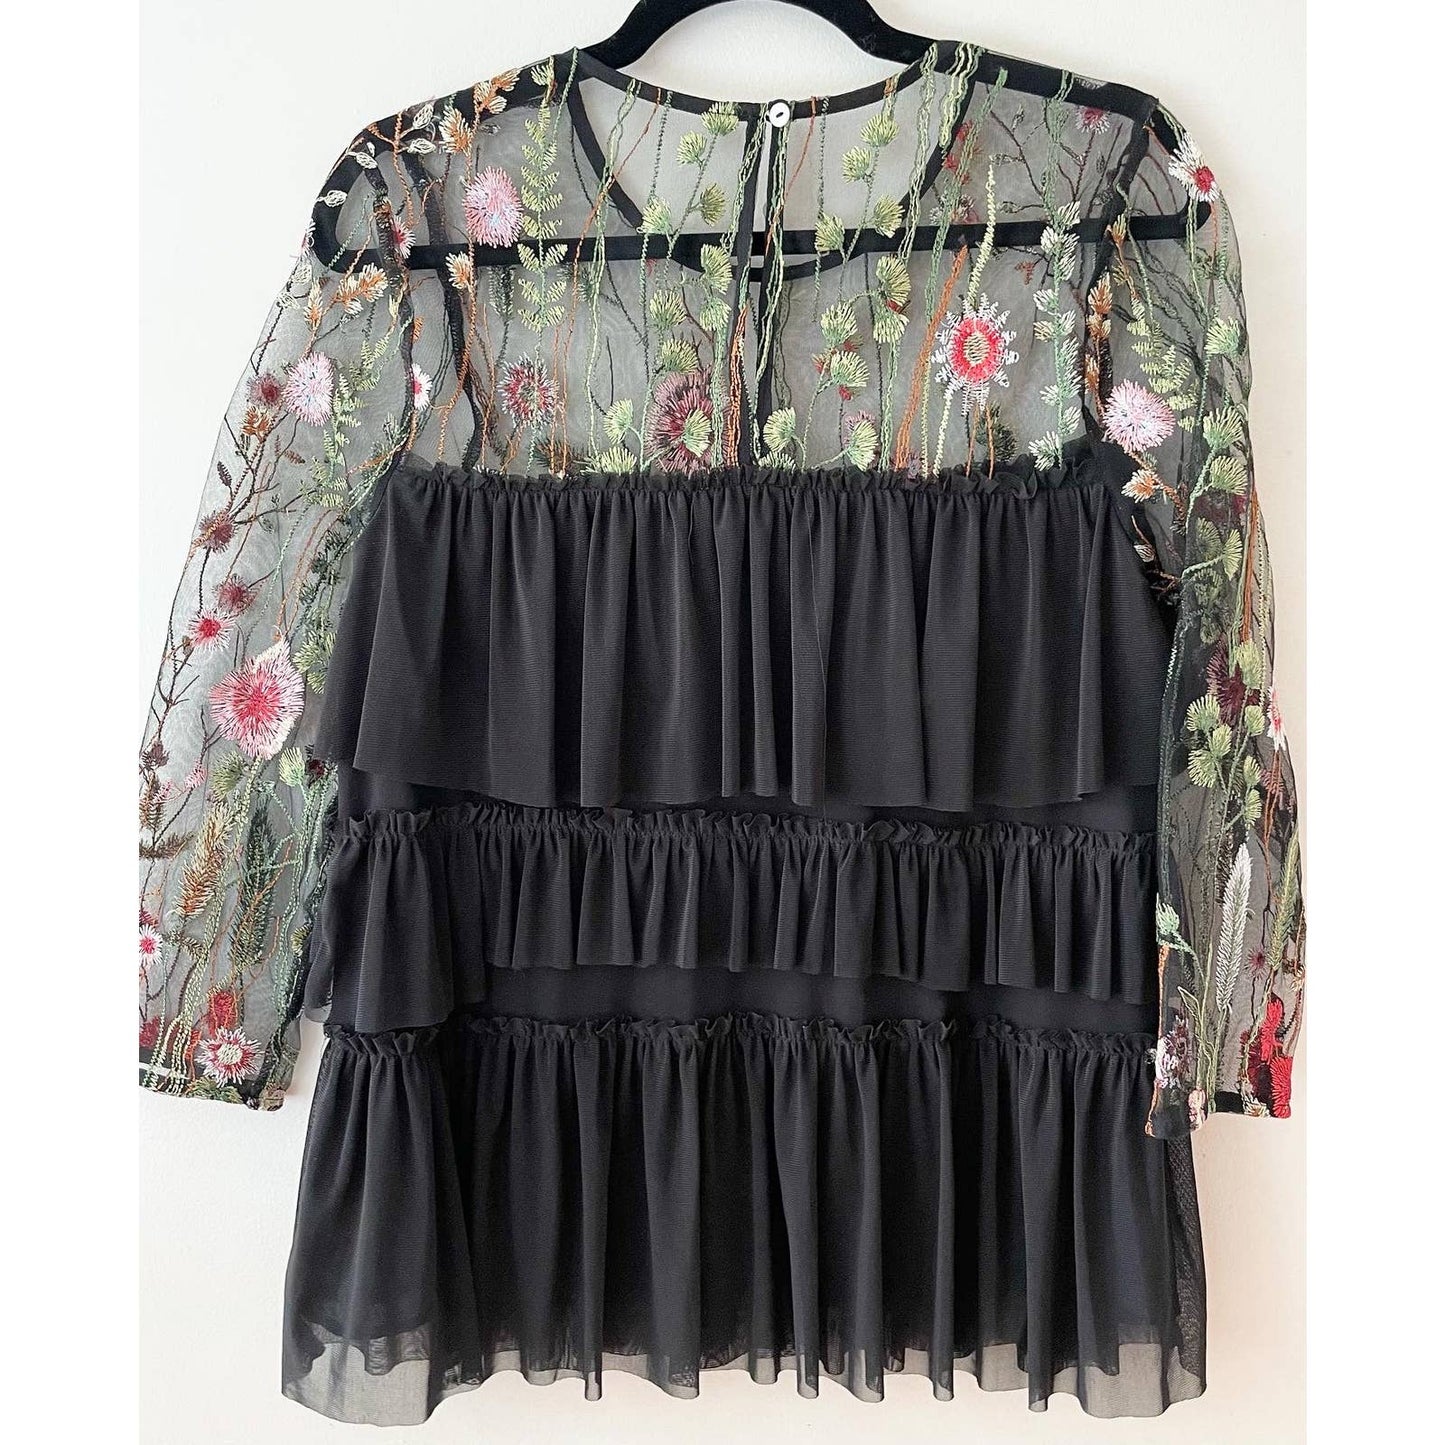 Entro Black Floral Embroidered Sheer Ruffle Shirt